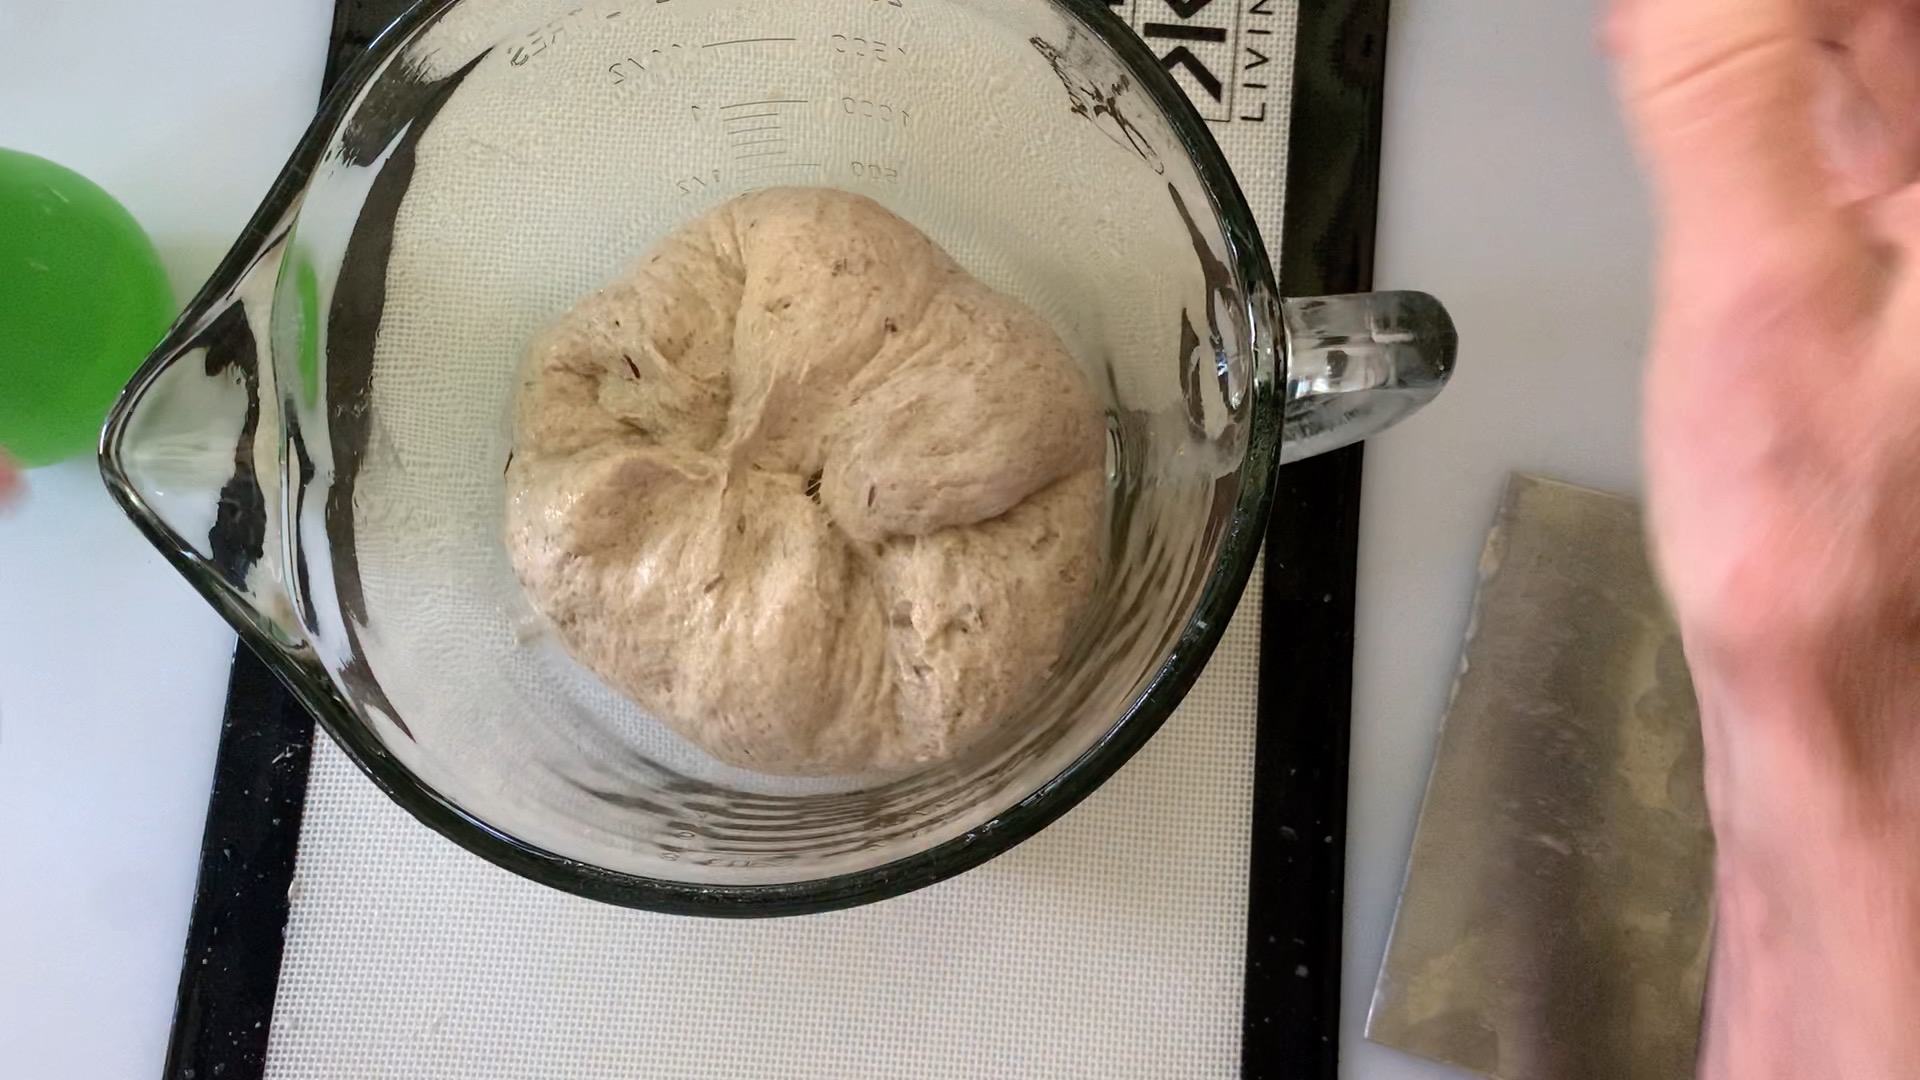 dough ball is prepared for second rise